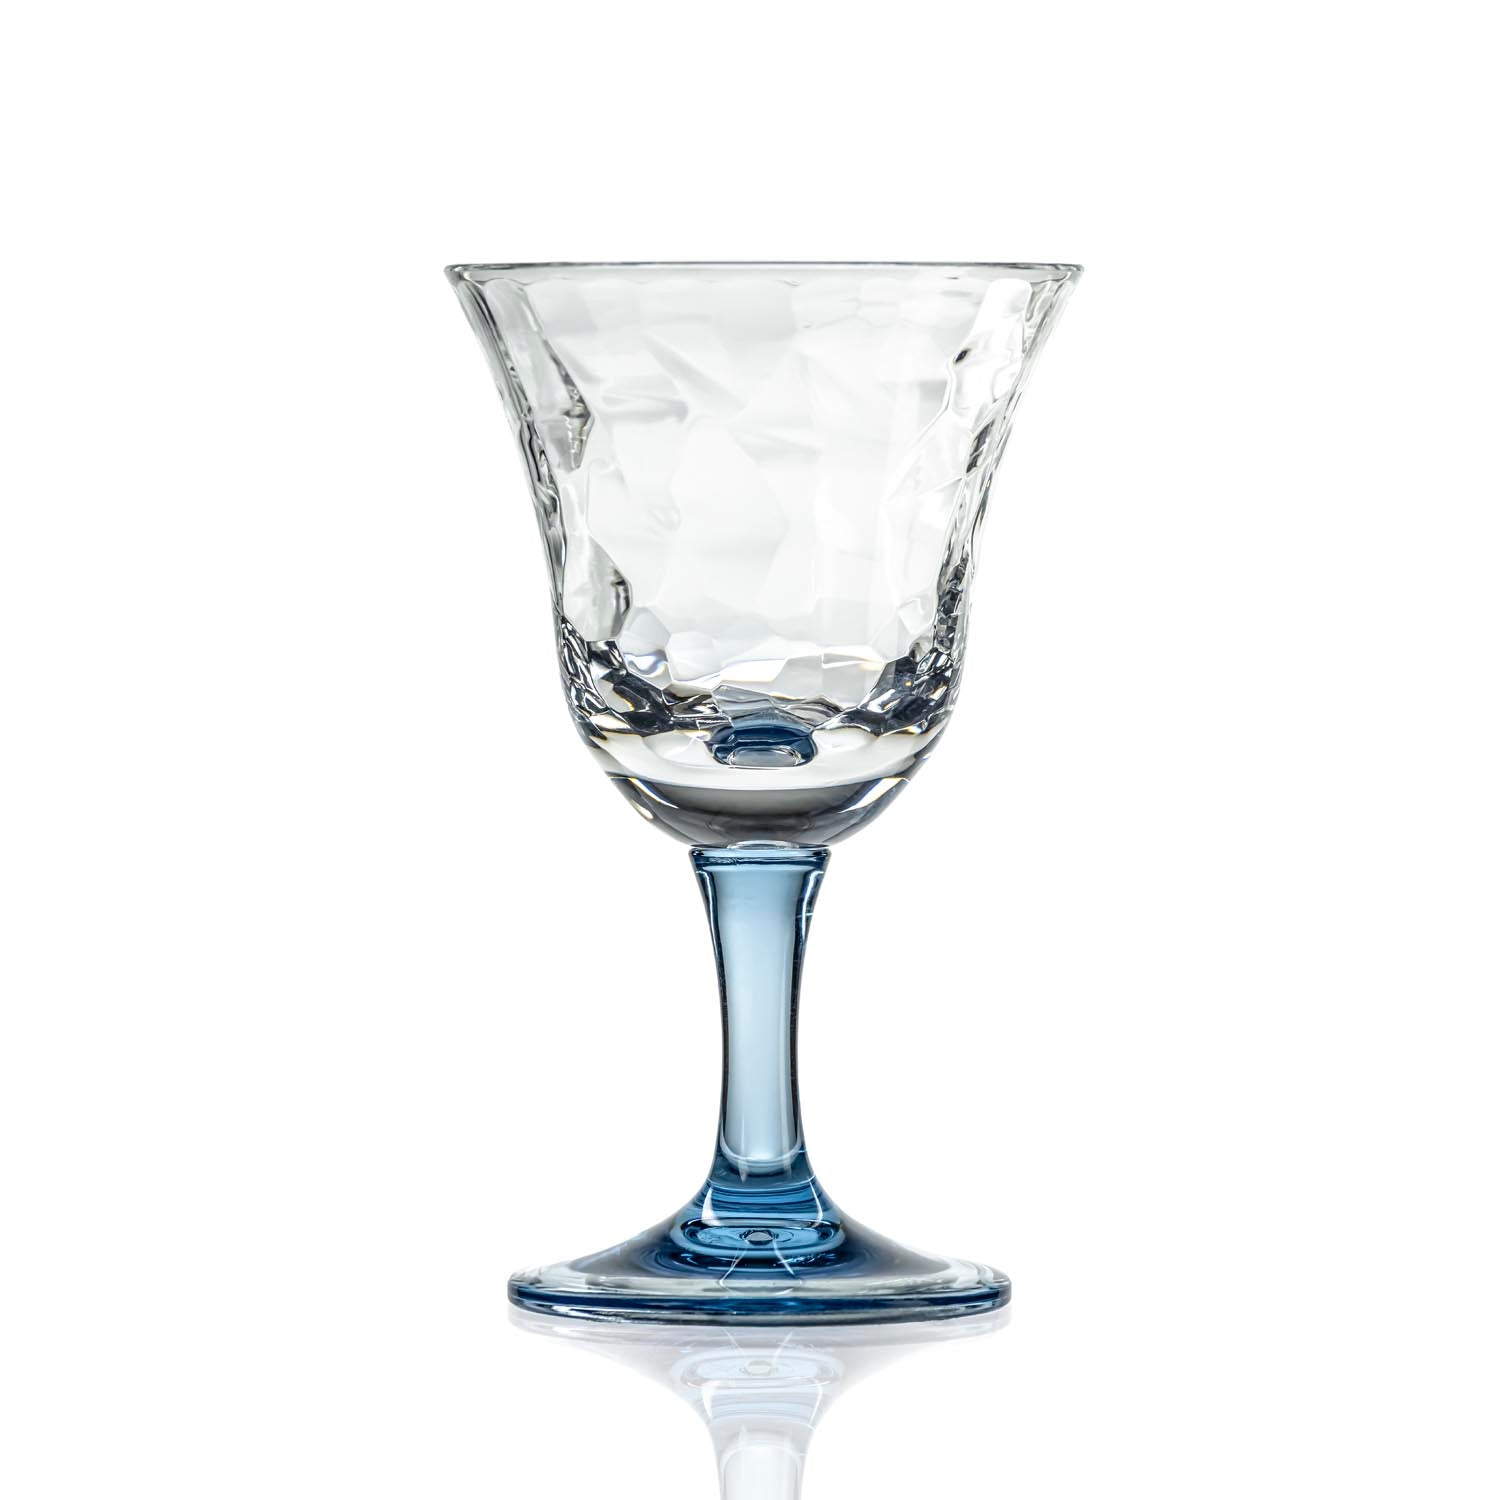 12-ounce blue acrylic wine glasses from the Merritt Designs Cascade collection. Front view on white background